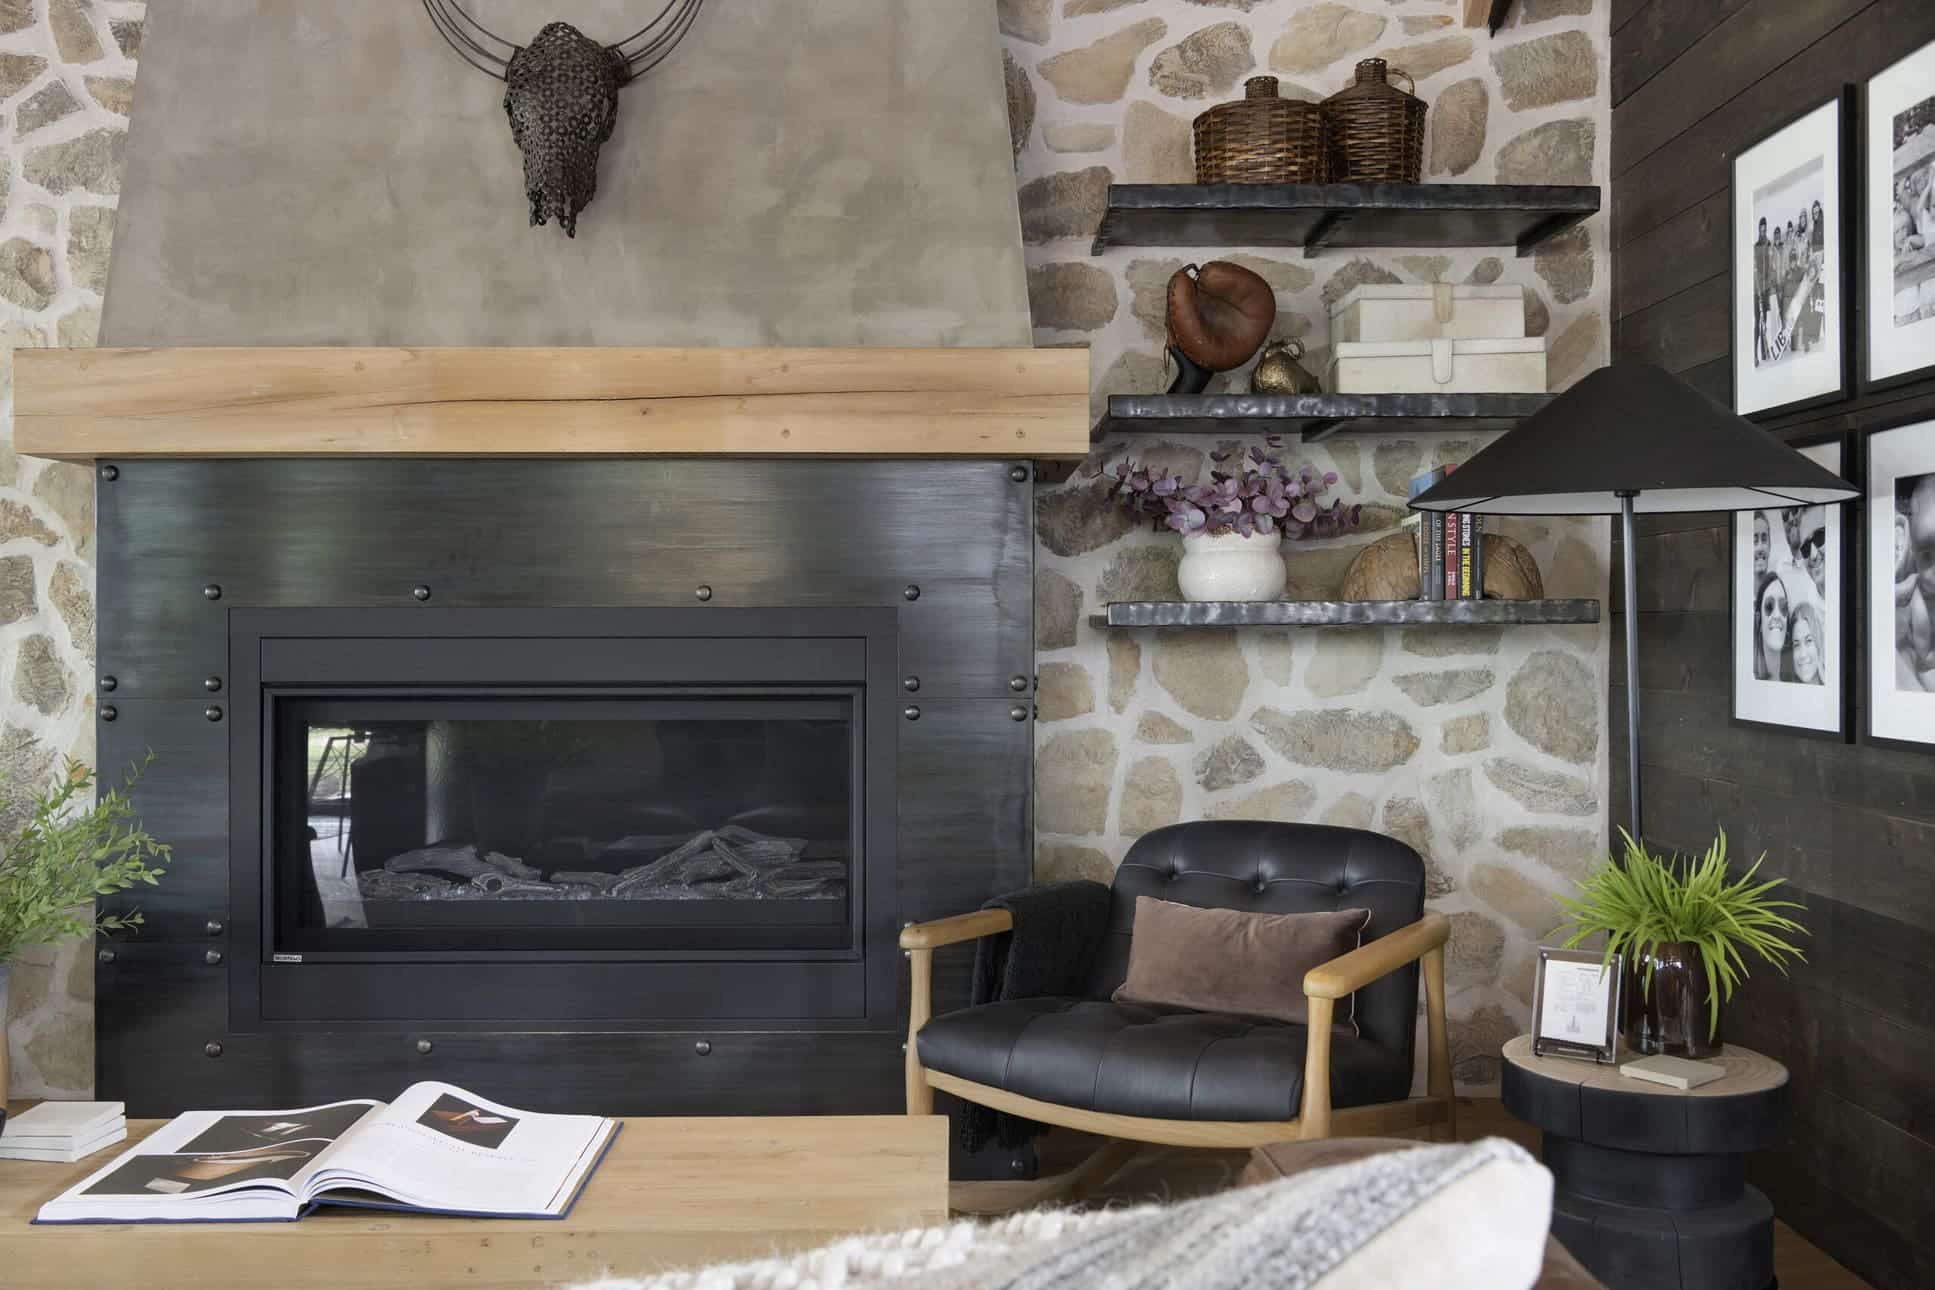 Manomin Resawn Timbers reclaimed fireplace barn wood mantel installed by Wes Hanson Builders and Designed by Tays & Co. Design